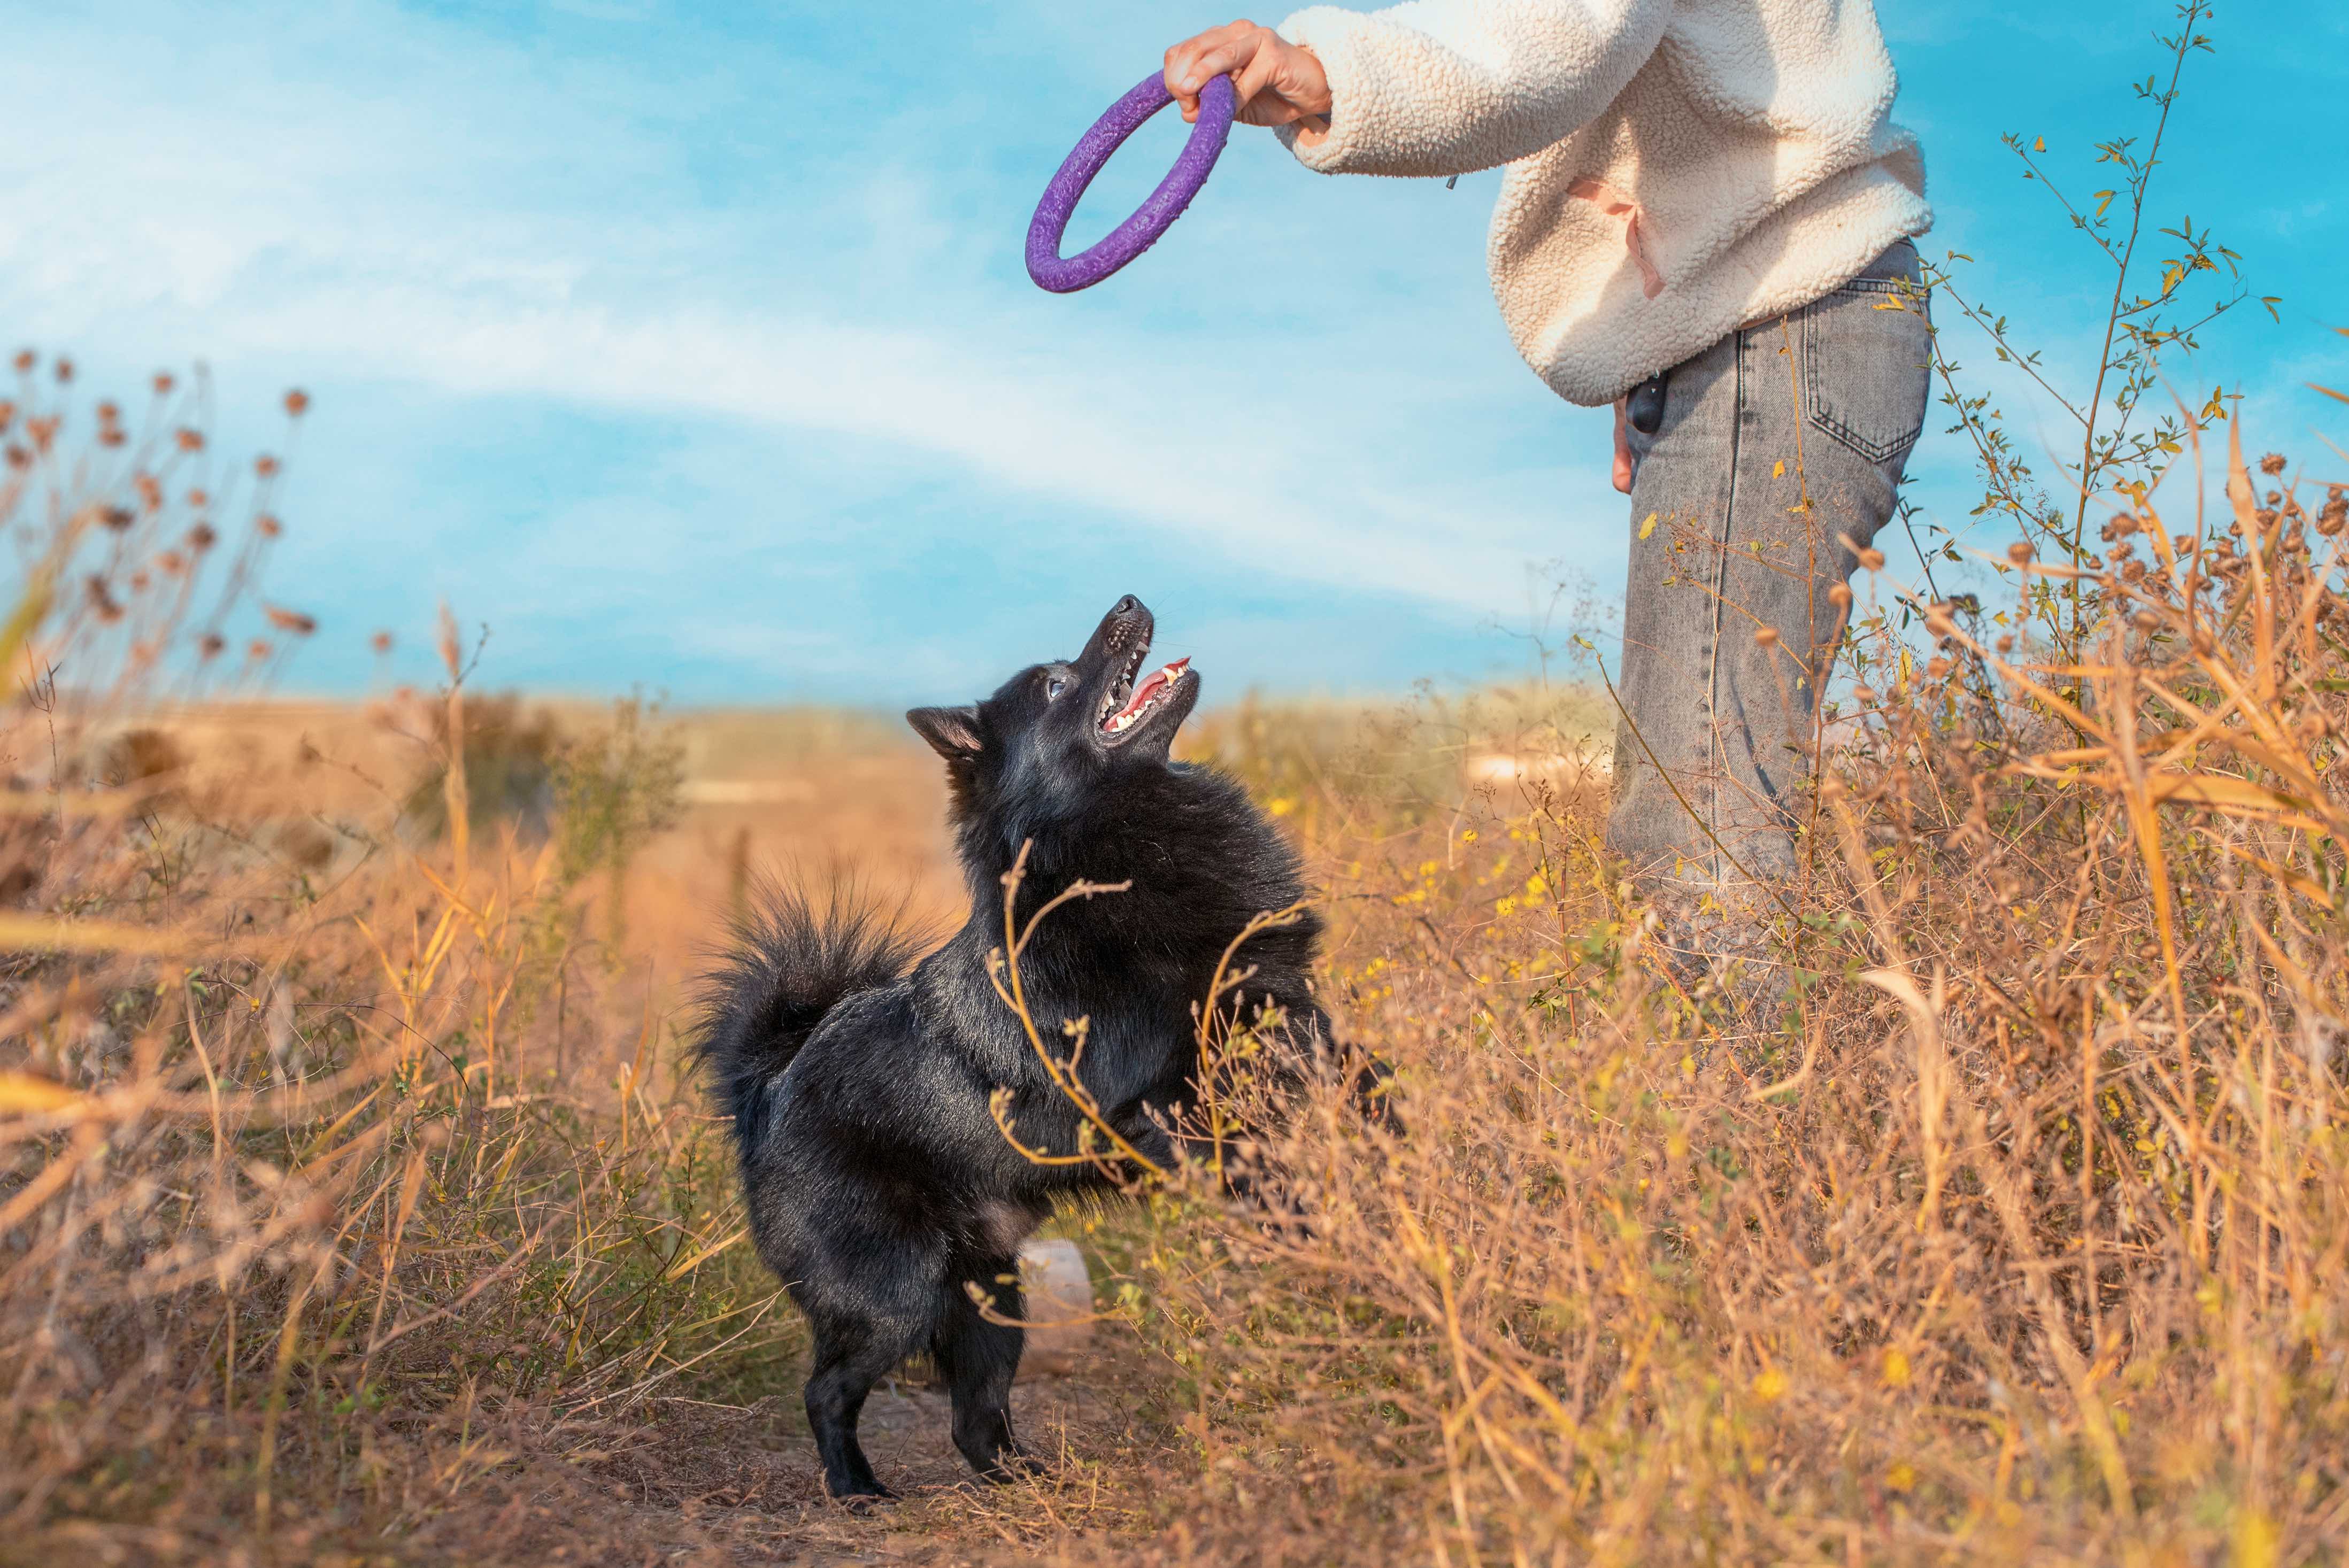 small black Schipperke dog looking up at a human holding a toy